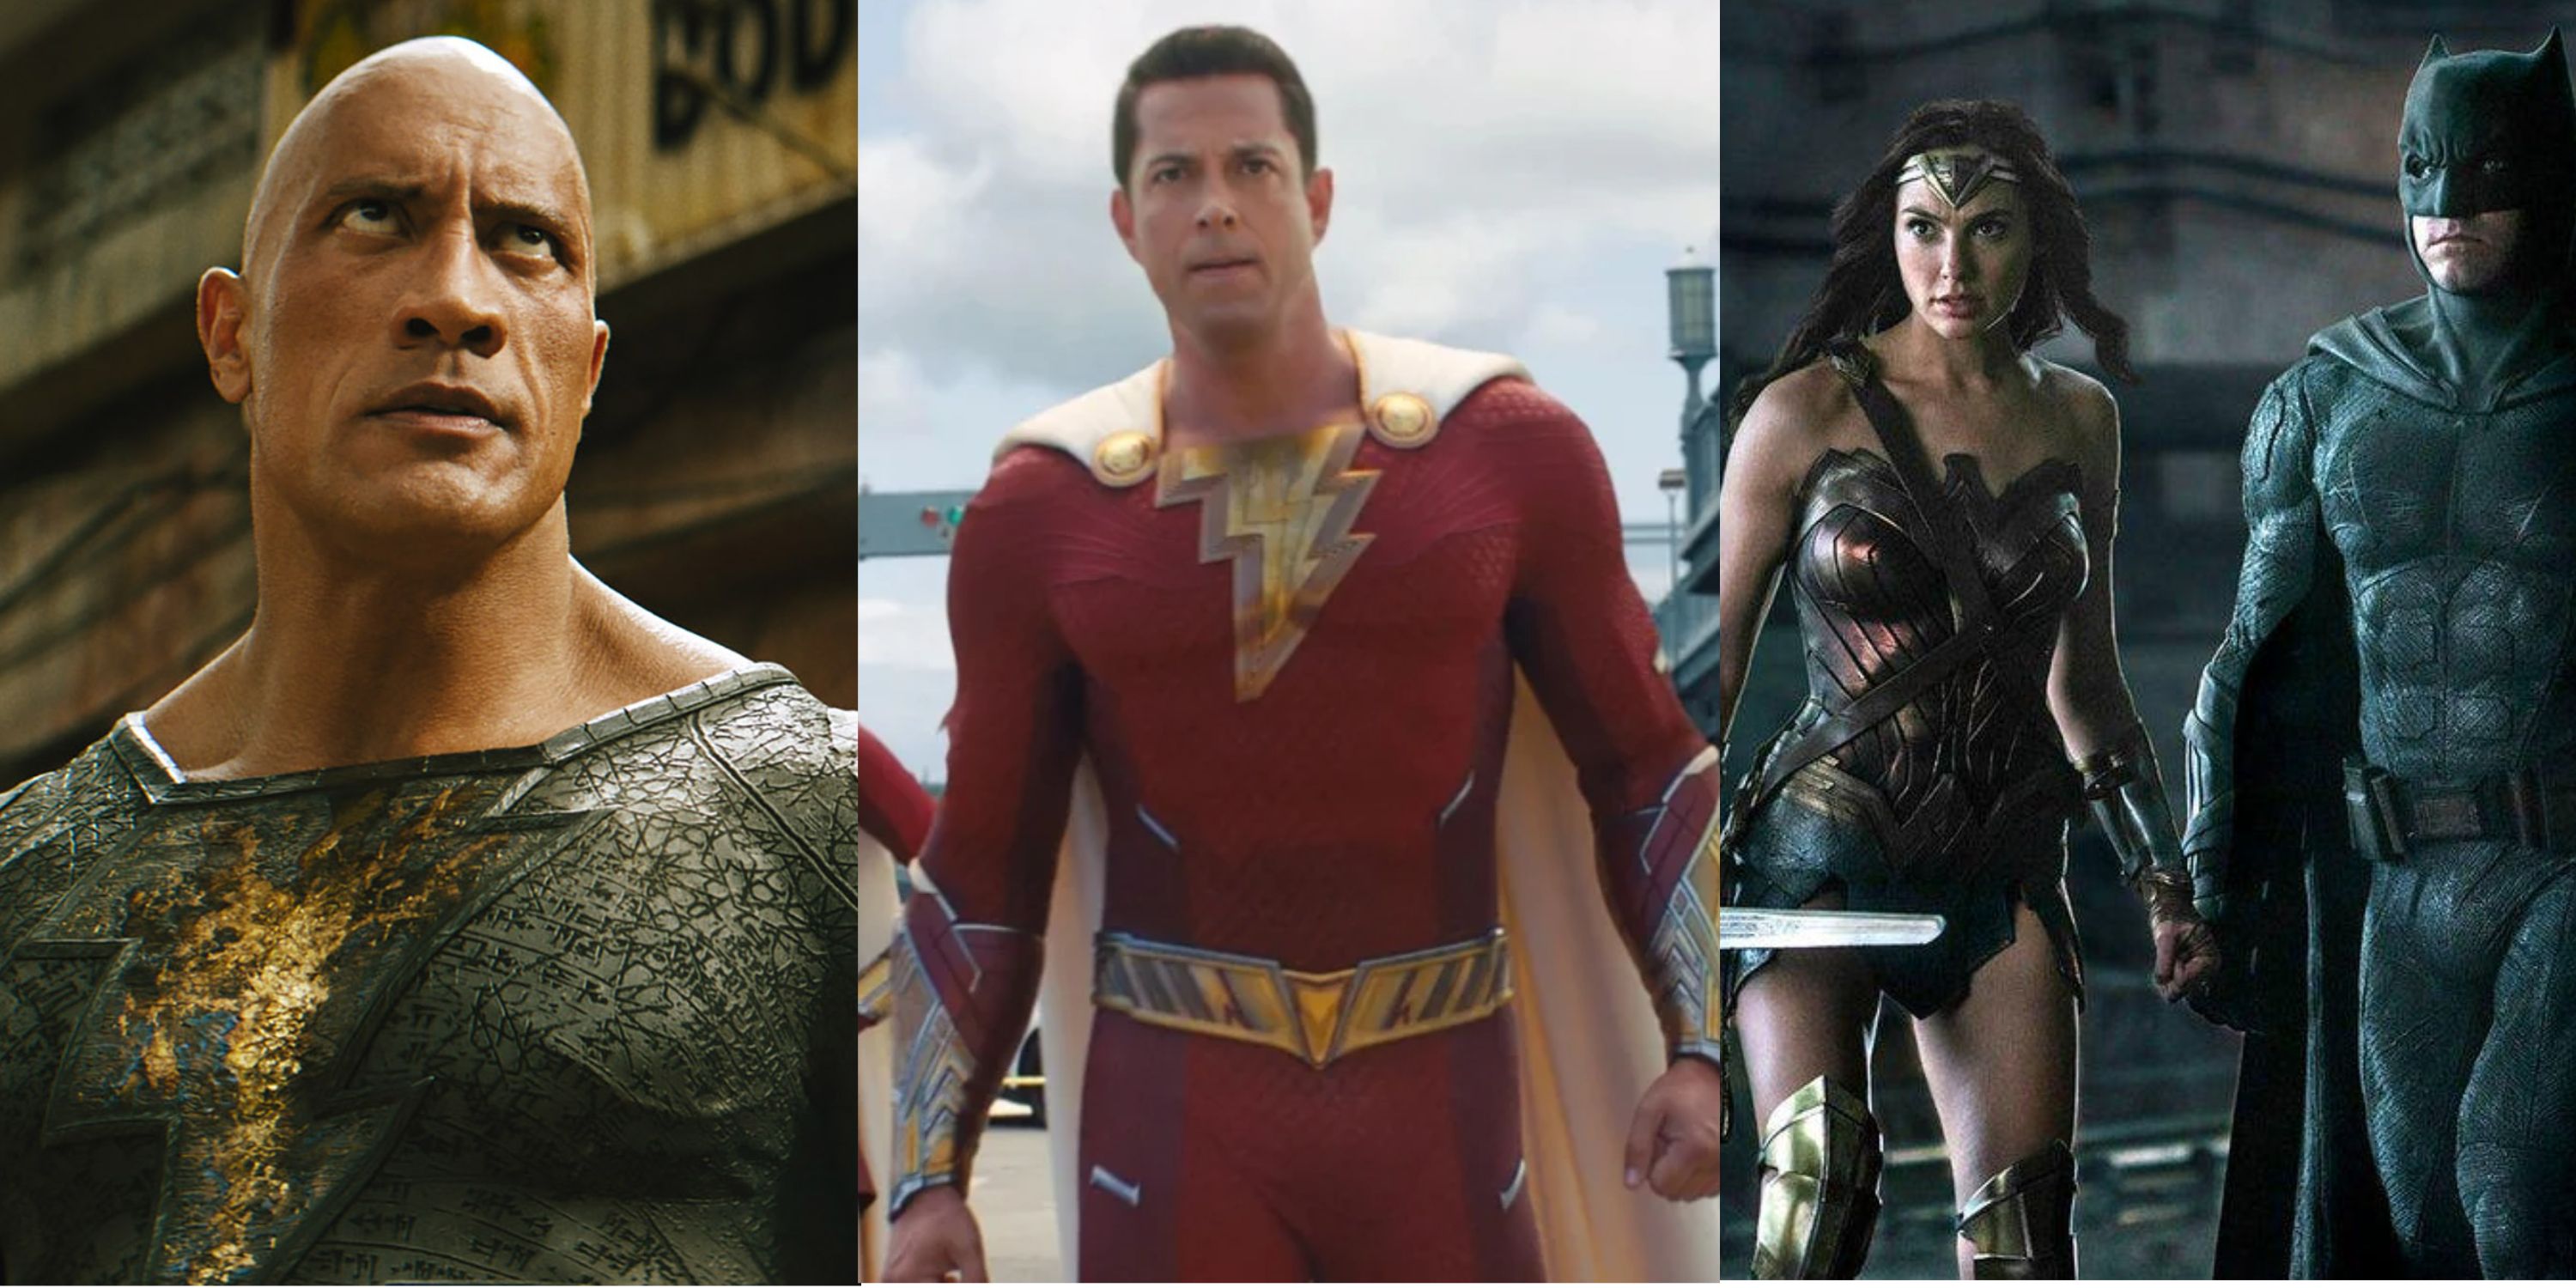 DCEU Movies and Series Ranked: DC Movies and Shows By Tomatometer